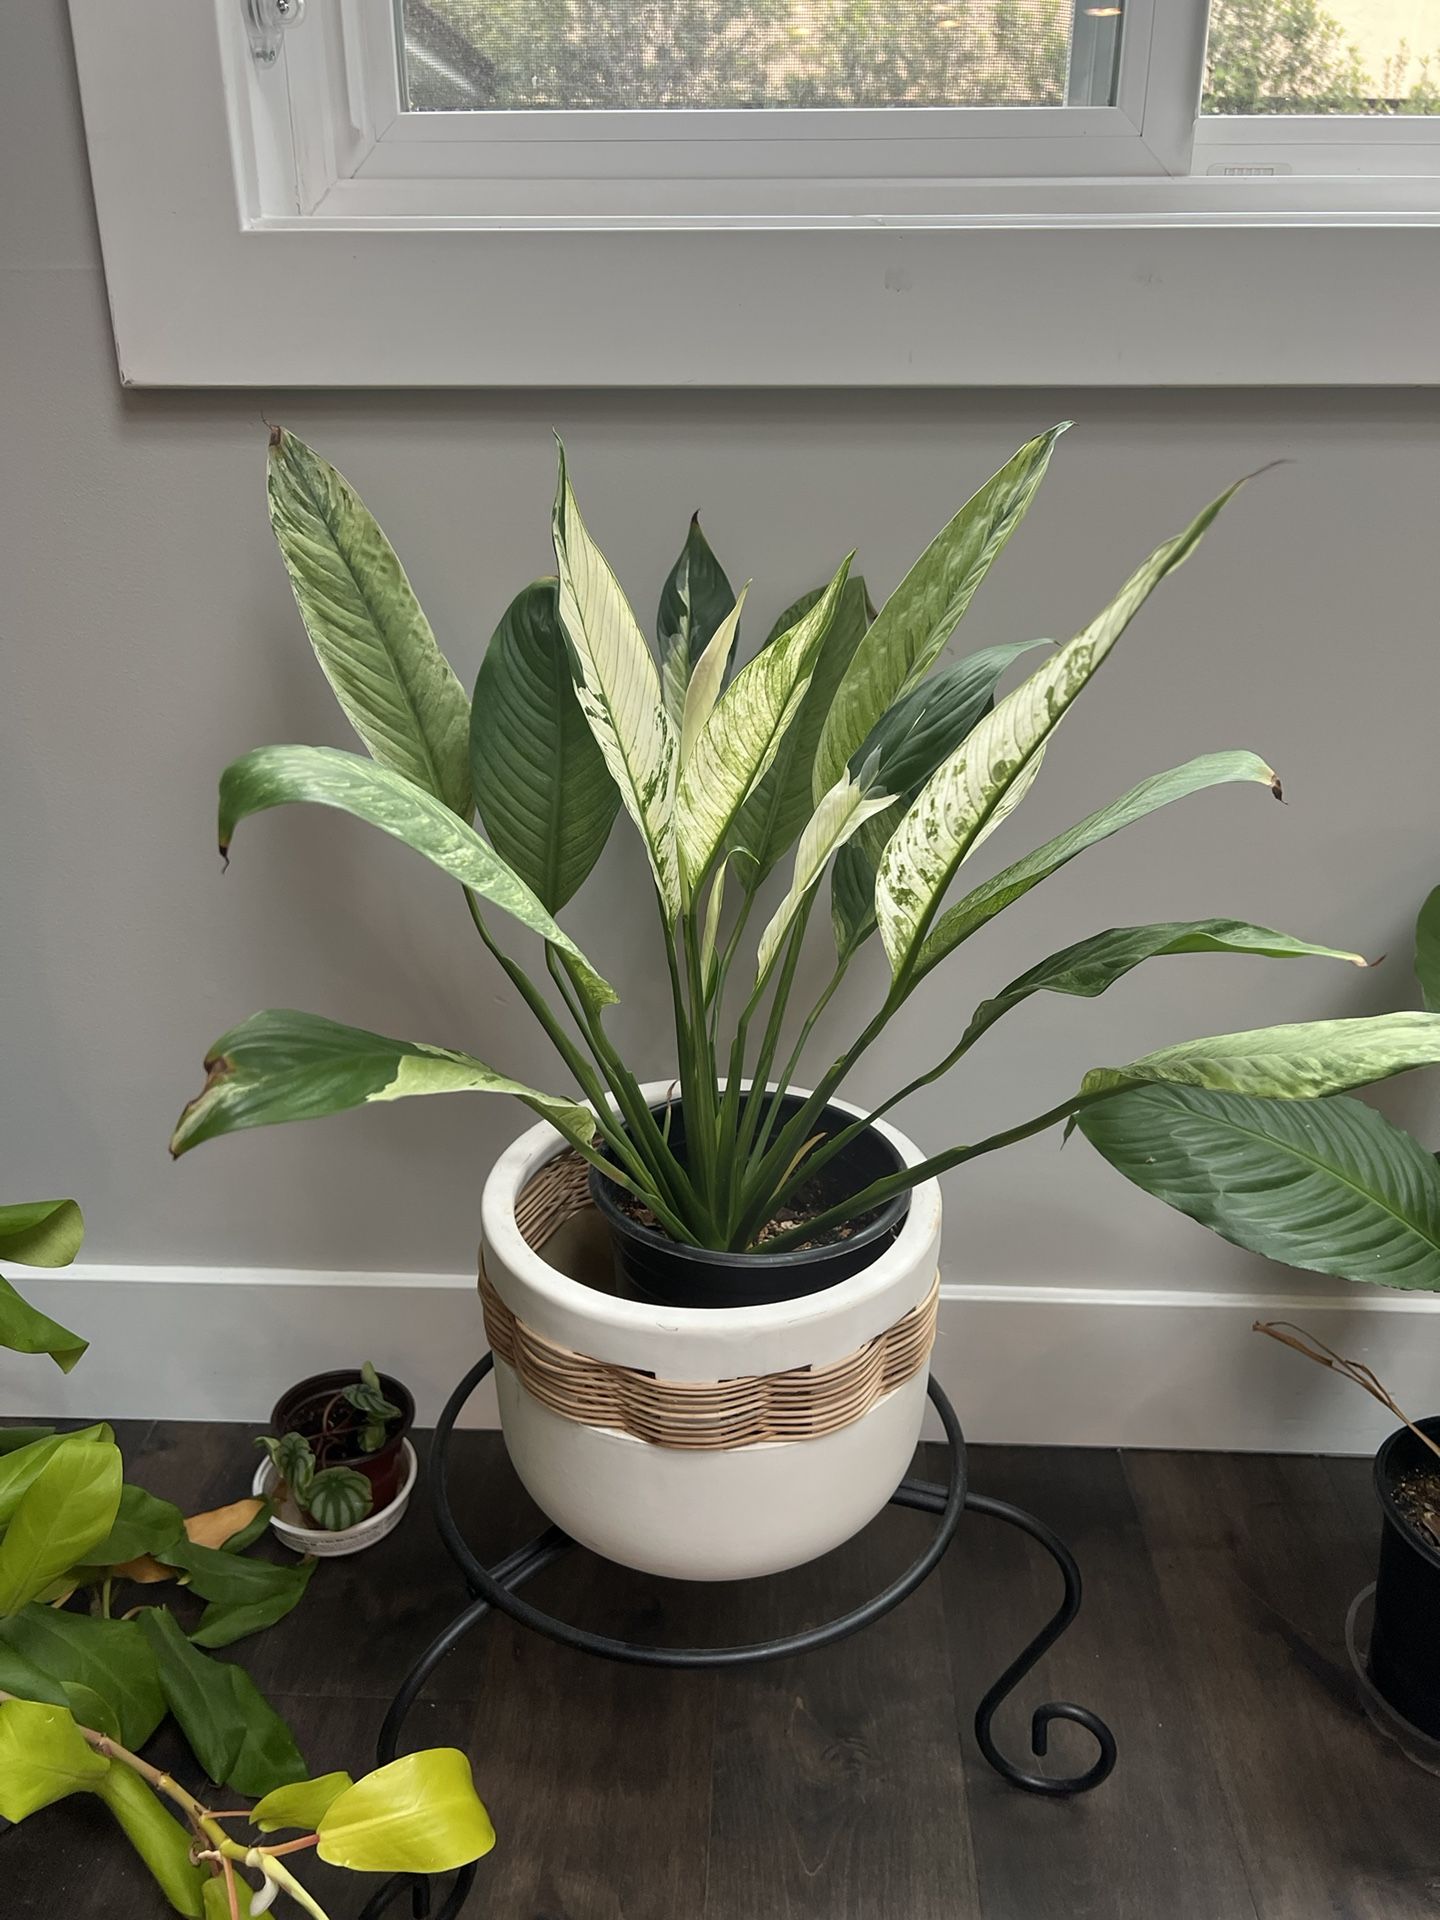 Variegated Spathiphyllum Peace Lily - 8” Pot